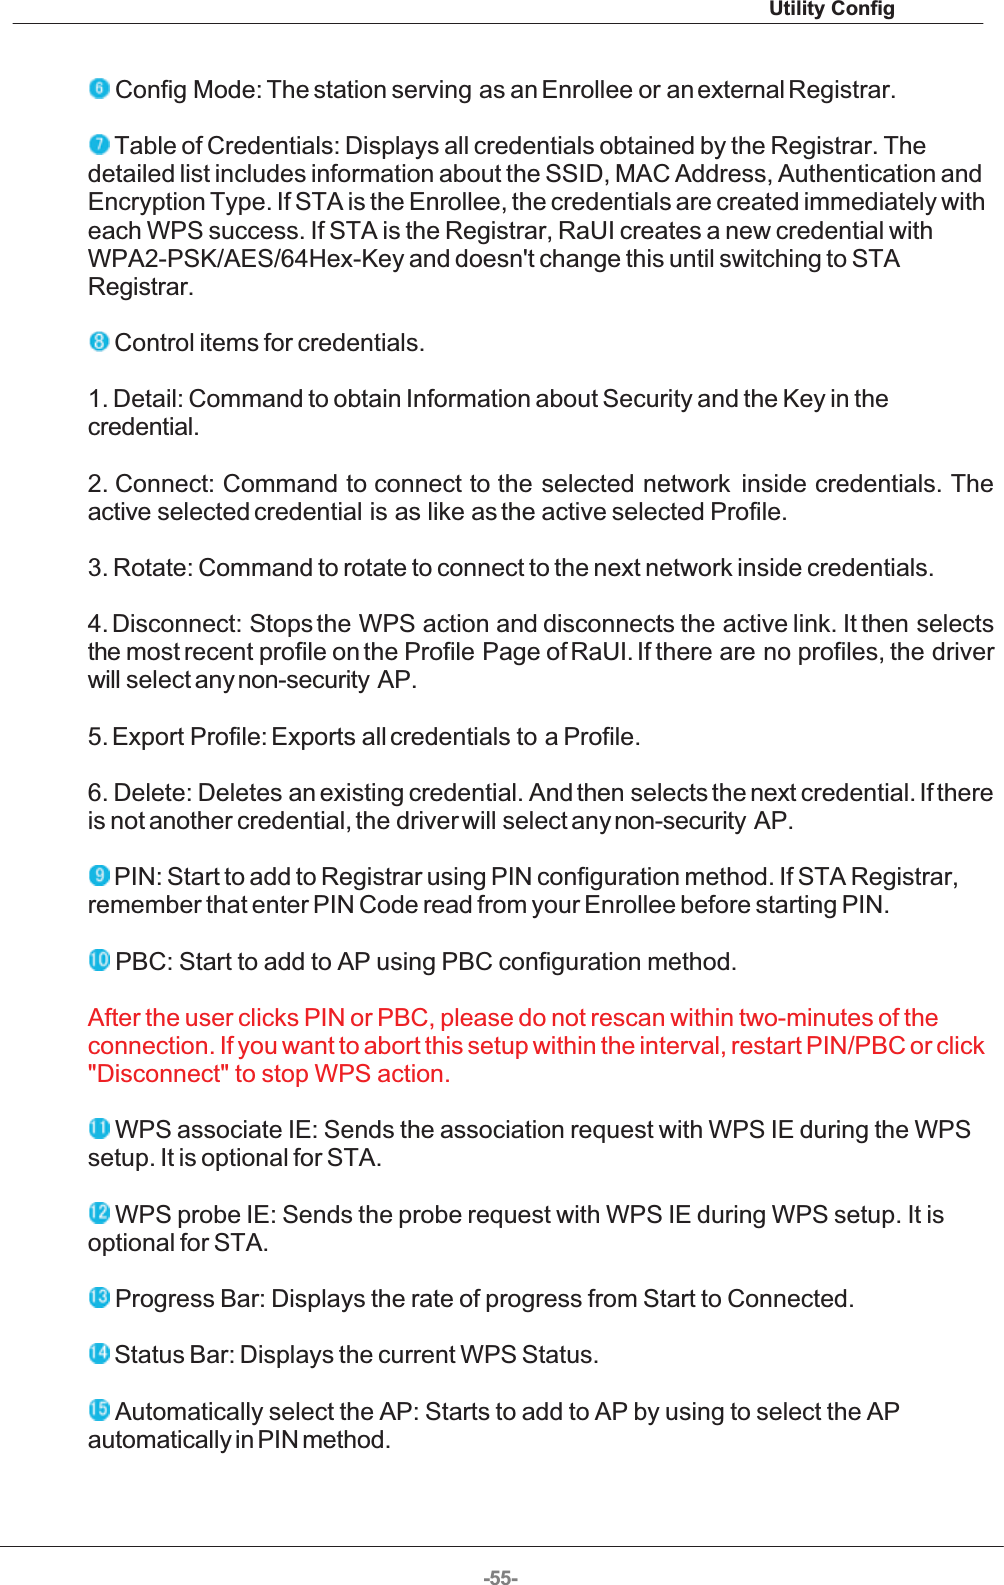 Utility Config-55-  Config Mode: The station serving  as an Enrollee or an external Registrar.  Table of Credentials: Displays all credentials obtained by the Registrar. Thedetailed list includes information about the SSID, MAC Address, Authentication andEncryption Type. If STA is the Enrollee, the credentials are created immediately witheach WPS success. If STA is the Registrar, RaUI creates a new credential withWPA2-PSK/AES/64Hex-Key and doesn&apos;t change this until switching to STARegistrar.  Control items for credentials. 1. Detail: Command to obtain Information about Security and the Key in thecredential. 2. Connect: Command to  connect to  the  selected  network   inside  credentials.  Theactive selected credential is as like as the active selected Profile. 3. Rotate: Command to rotate to connect to the next network inside credentials. 4. Disconnect:  Stops the  WPS action and disconnects the active link. It then selectsthe most recent profile on the Profile Page of RaUI. If there are no profiles, the driverwill select any non-security AP. 5. Export Profile: Exports all credentials to a Profile. 6. Delete: Deletes an existing credential. And then selects the next credential. If thereis not another credential, the driver will select any non-security AP.  PIN: Start to add to Registrar using PIN configuration method. If STA Registrar,remember that enter PIN Code read from your Enrollee before starting PIN.  PBC: Start to add to AP using PBC configuration method. After the user clicks PIN or PBC, please do not rescan within two-minutes of theconnection. If you want to abort this setup within the interval, restart PIN/PBC or click&quot;Disconnect&quot; to stop WPS action.  WPS associate IE: Sends the association request with WPS IE during the WPSsetup. It is optional for STA.  WPS probe IE: Sends the probe request with WPS IE during WPS setup. It isoptional for STA.  Progress Bar: Displays the rate of progress from Start to Connected.  Status Bar: Displays the current WPS Status.  Automatically select the AP: Starts to add to AP by using to select the APautomatically in PIN method. 